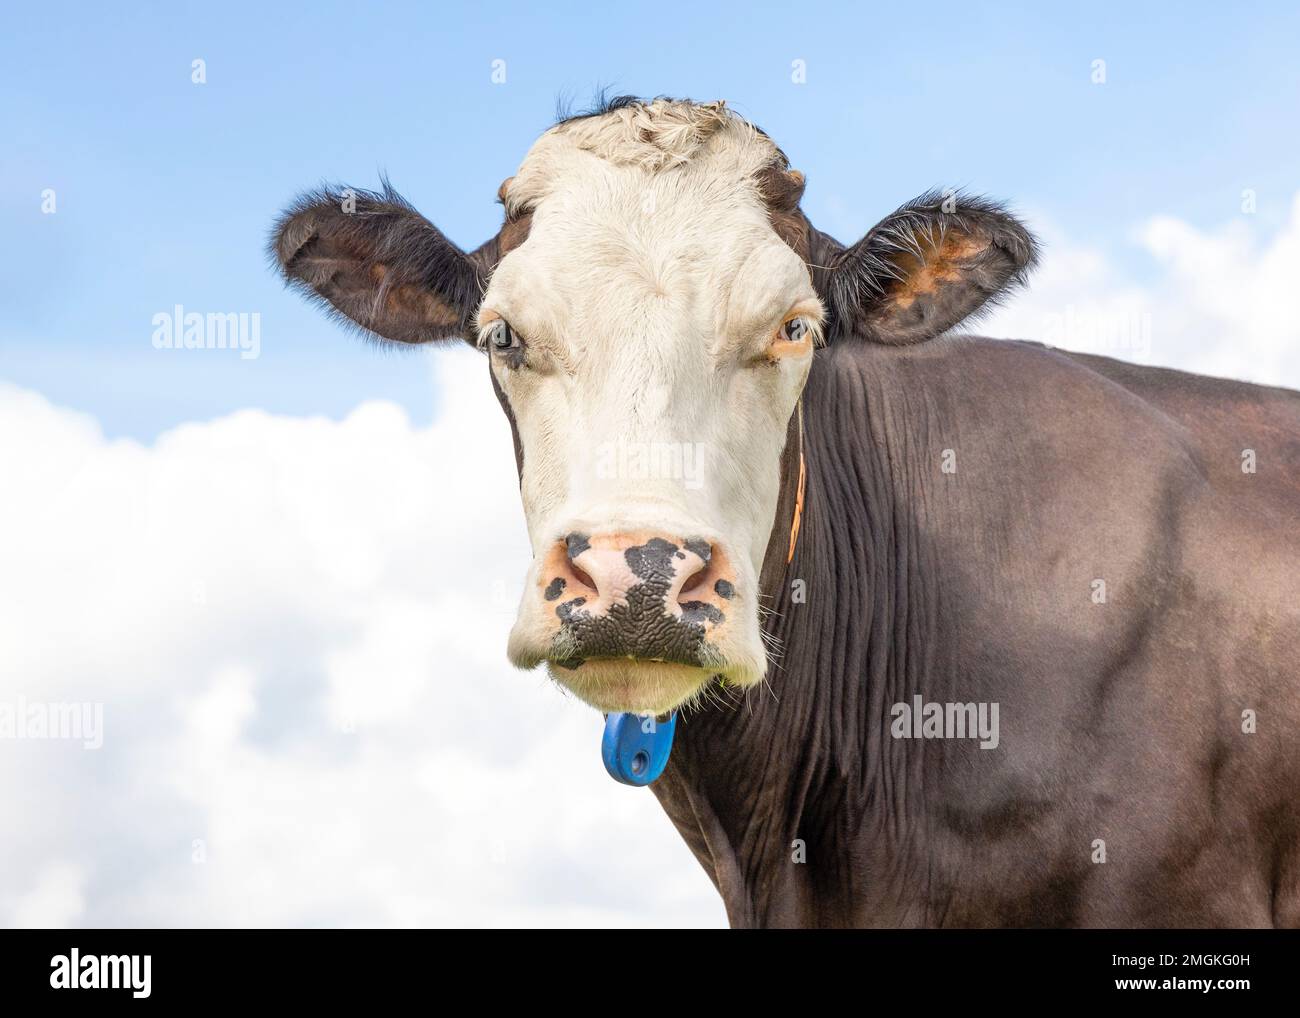 Cow face brown and white with a pink nose, looking proud and confident in front of a blue cloudy sky Stock Photo